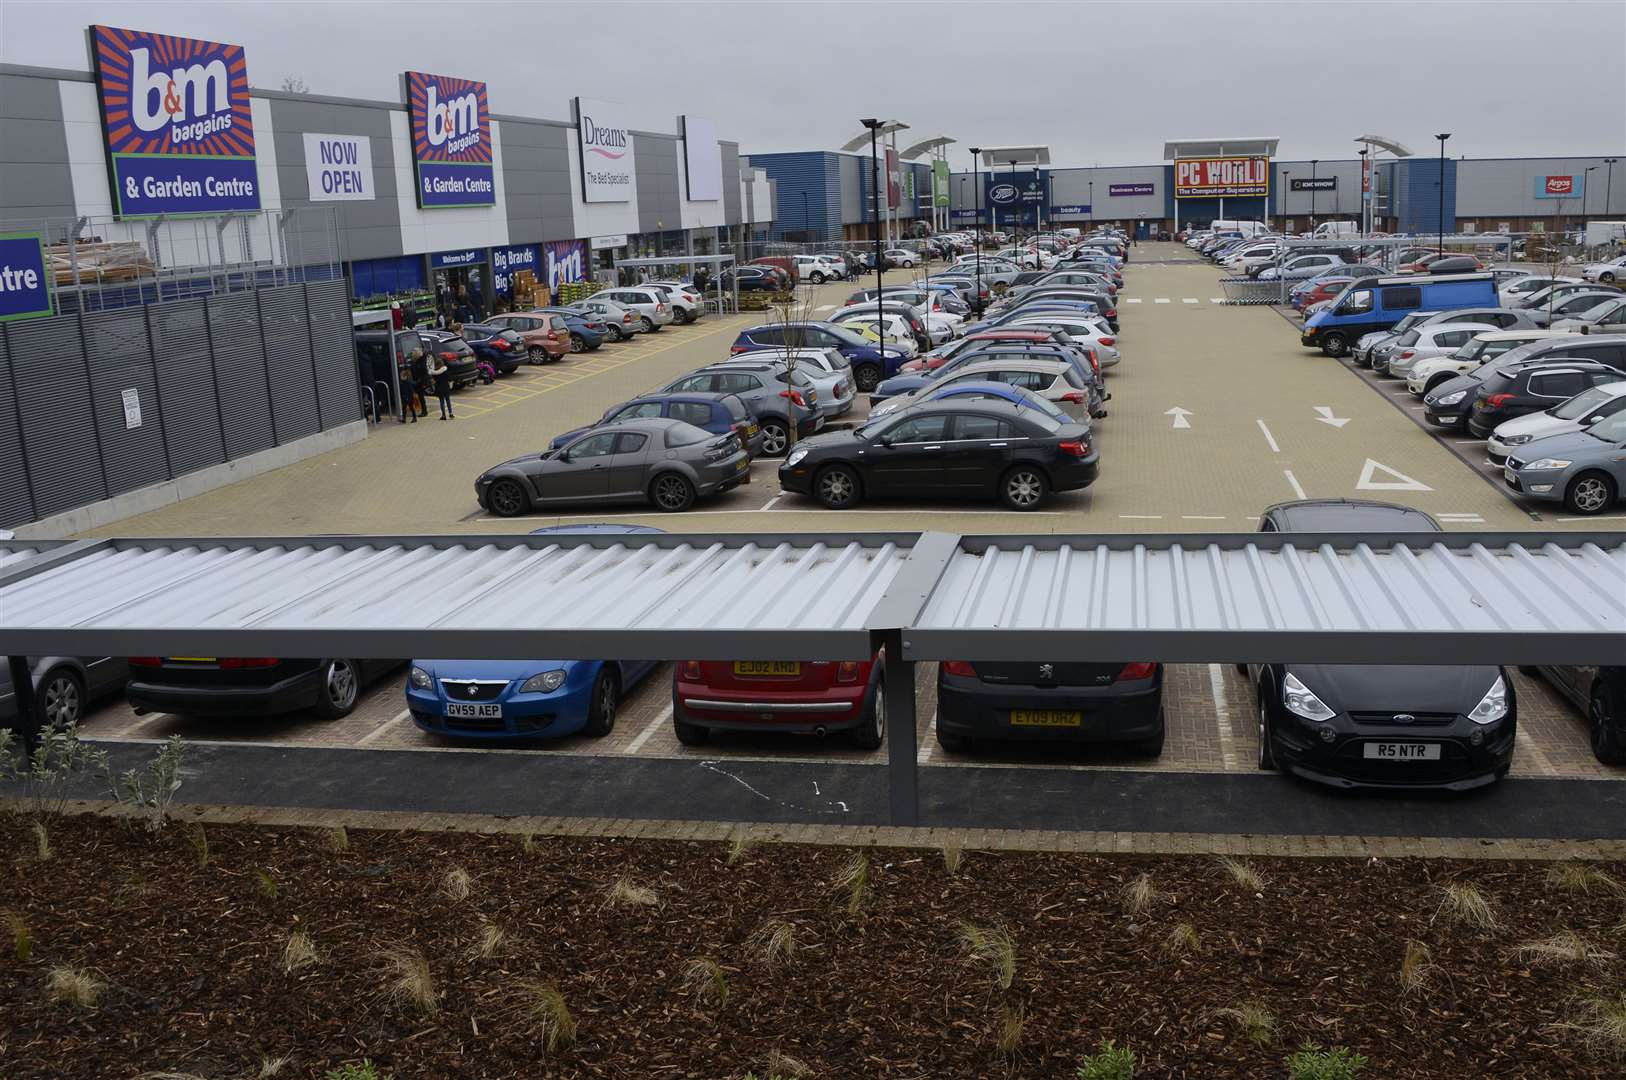 The car park at the retail park